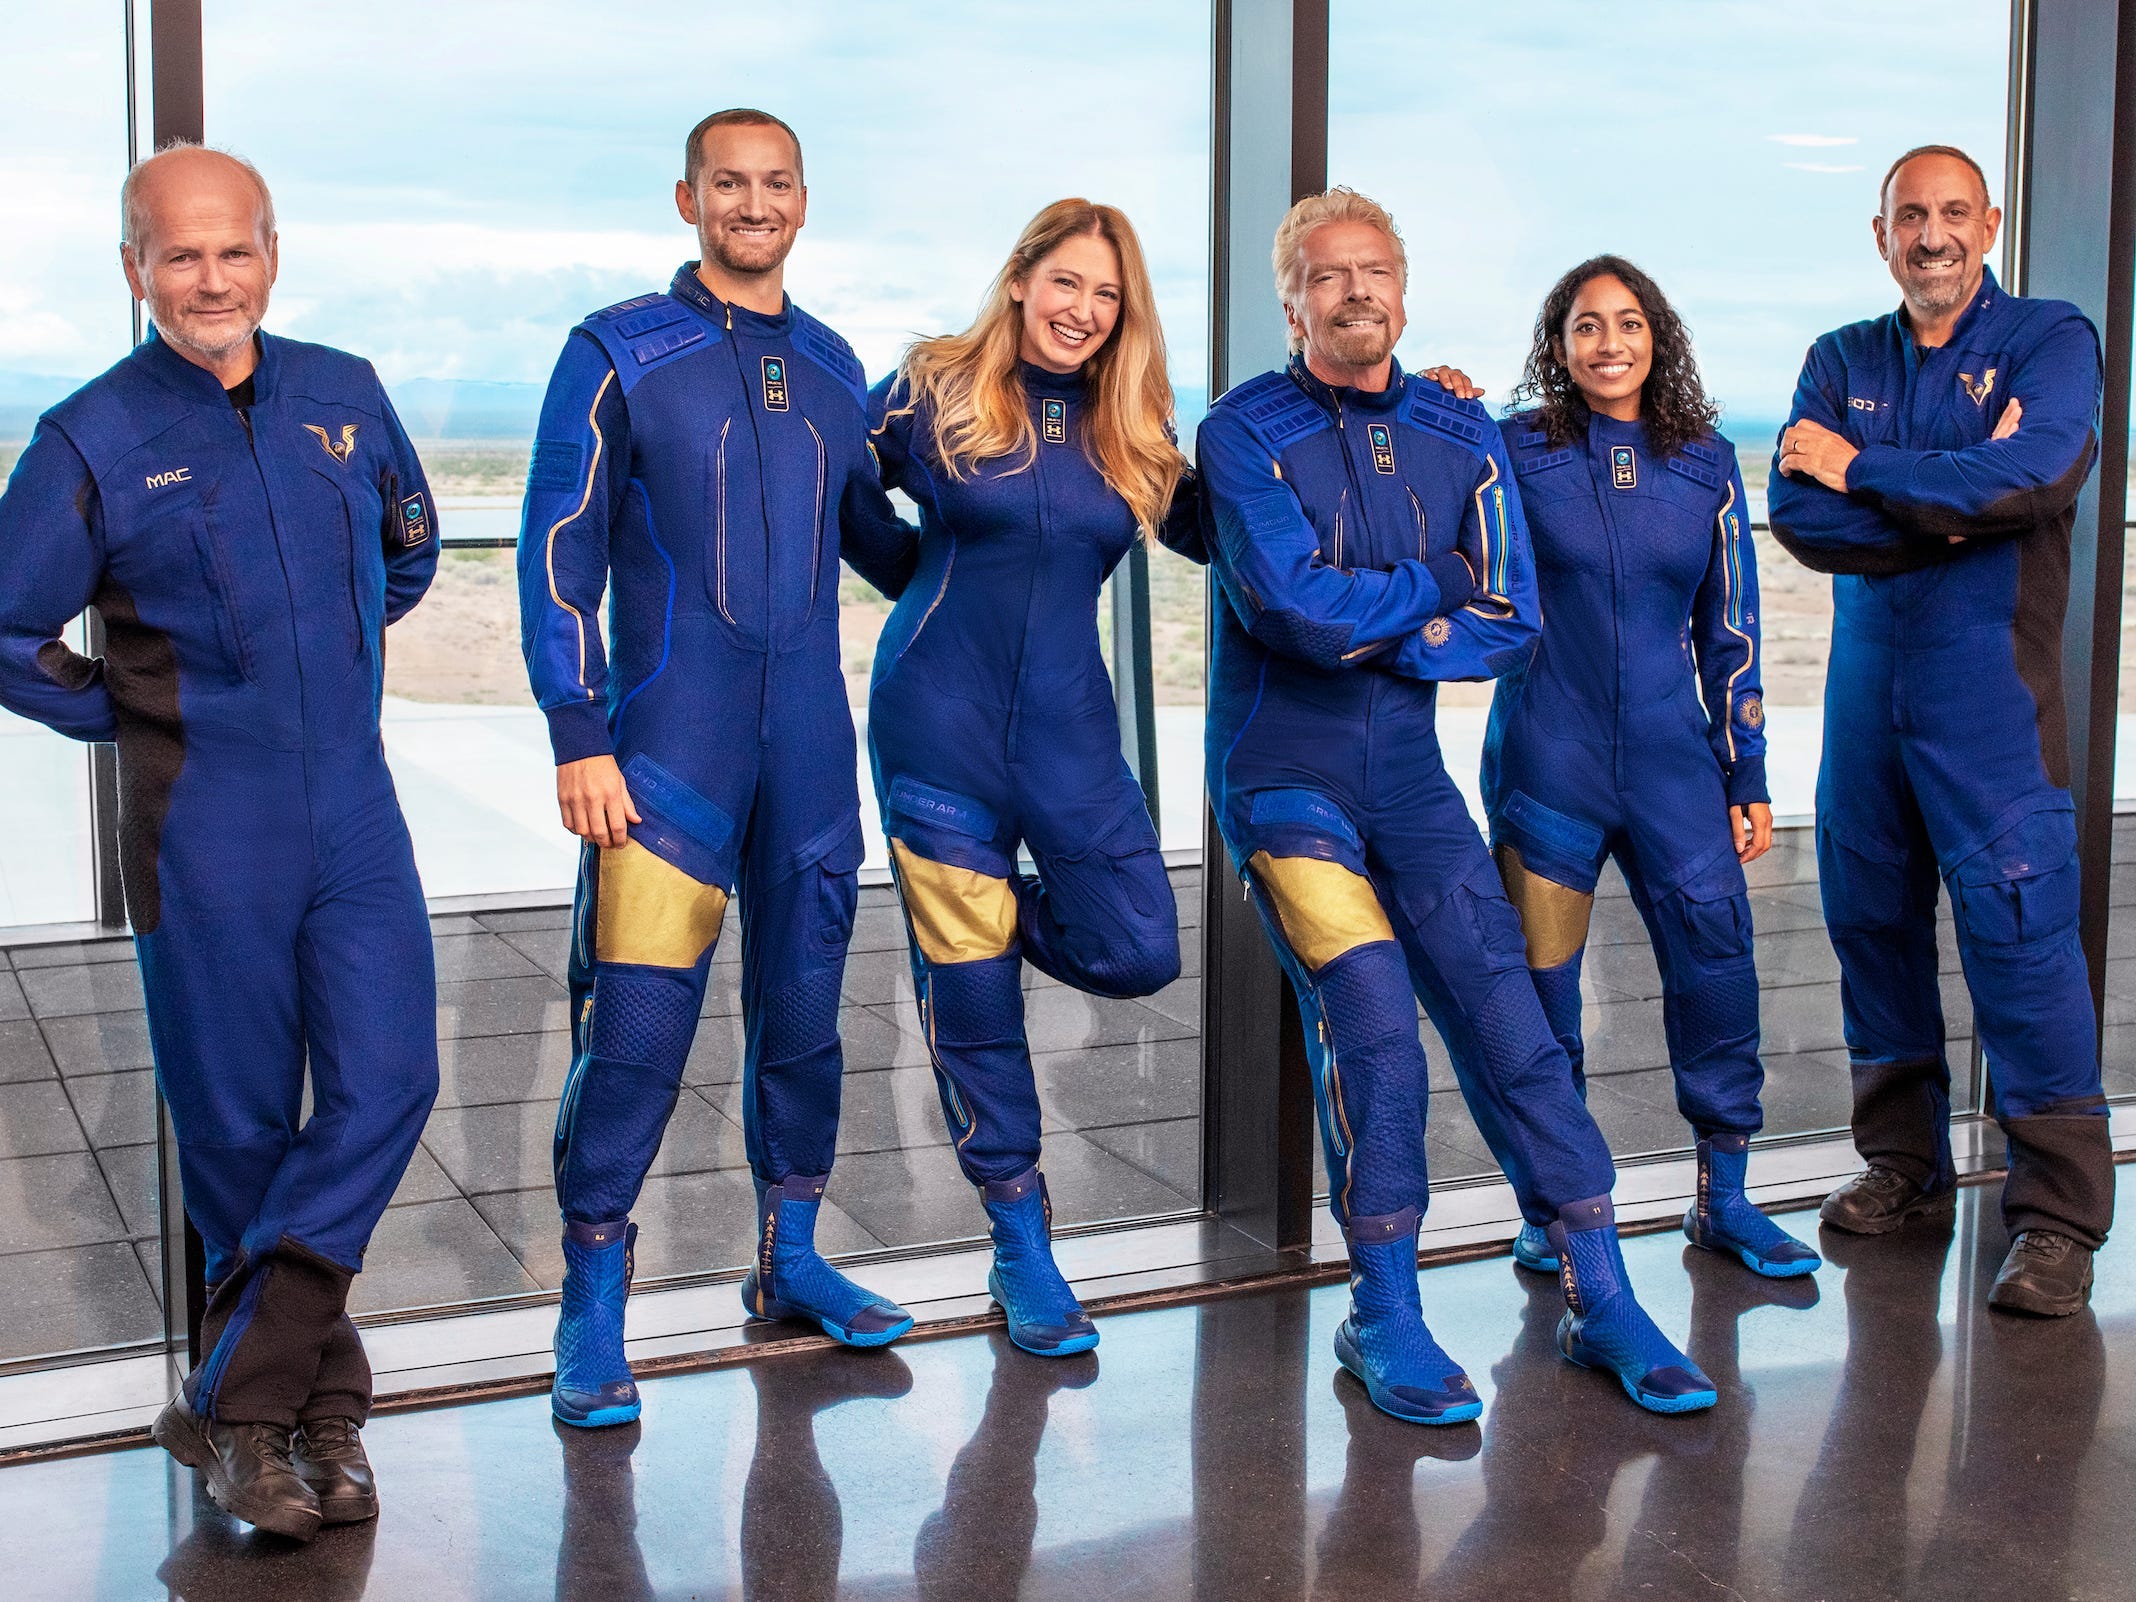 Six people in blue bodysuits - the crew of the VSS Unity - stand in front of a floor-to-ceiling window.